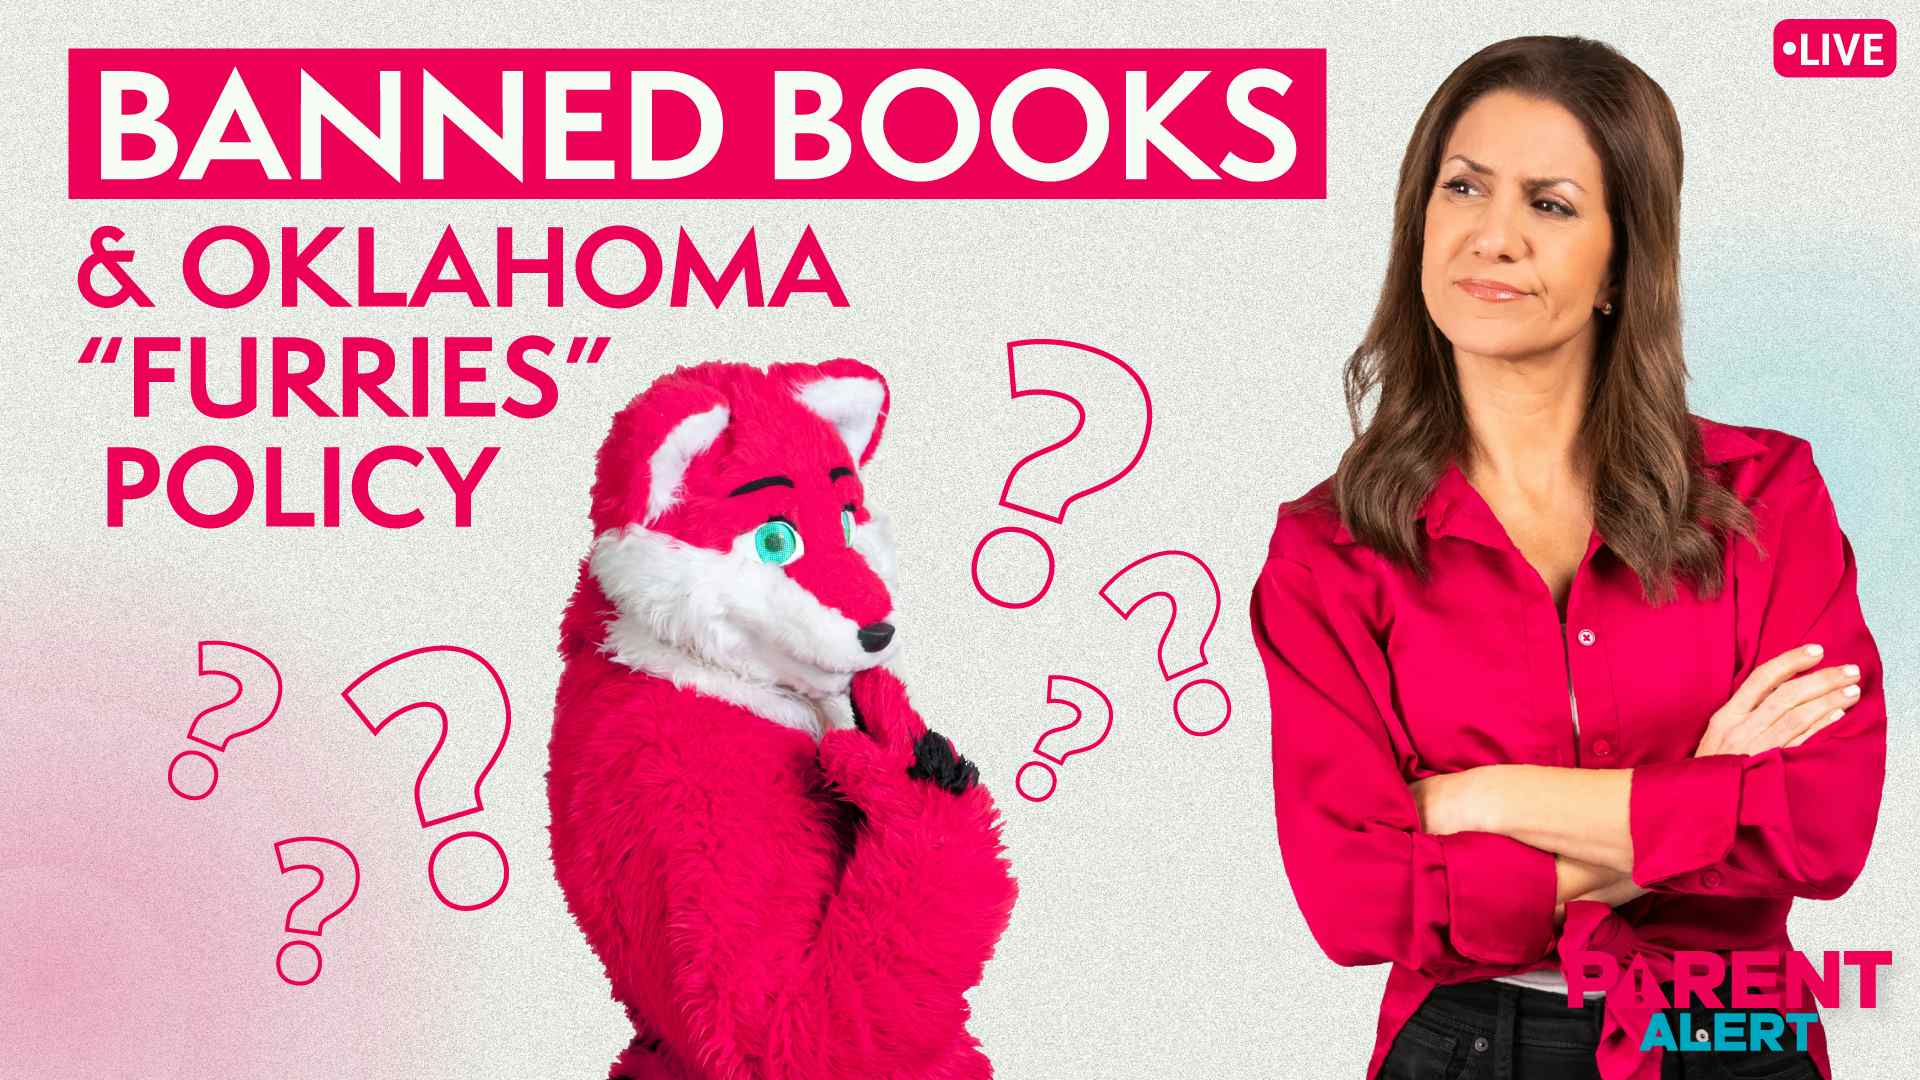 Parent Alert: Banned Books & Oklahoma “Furries” Policy